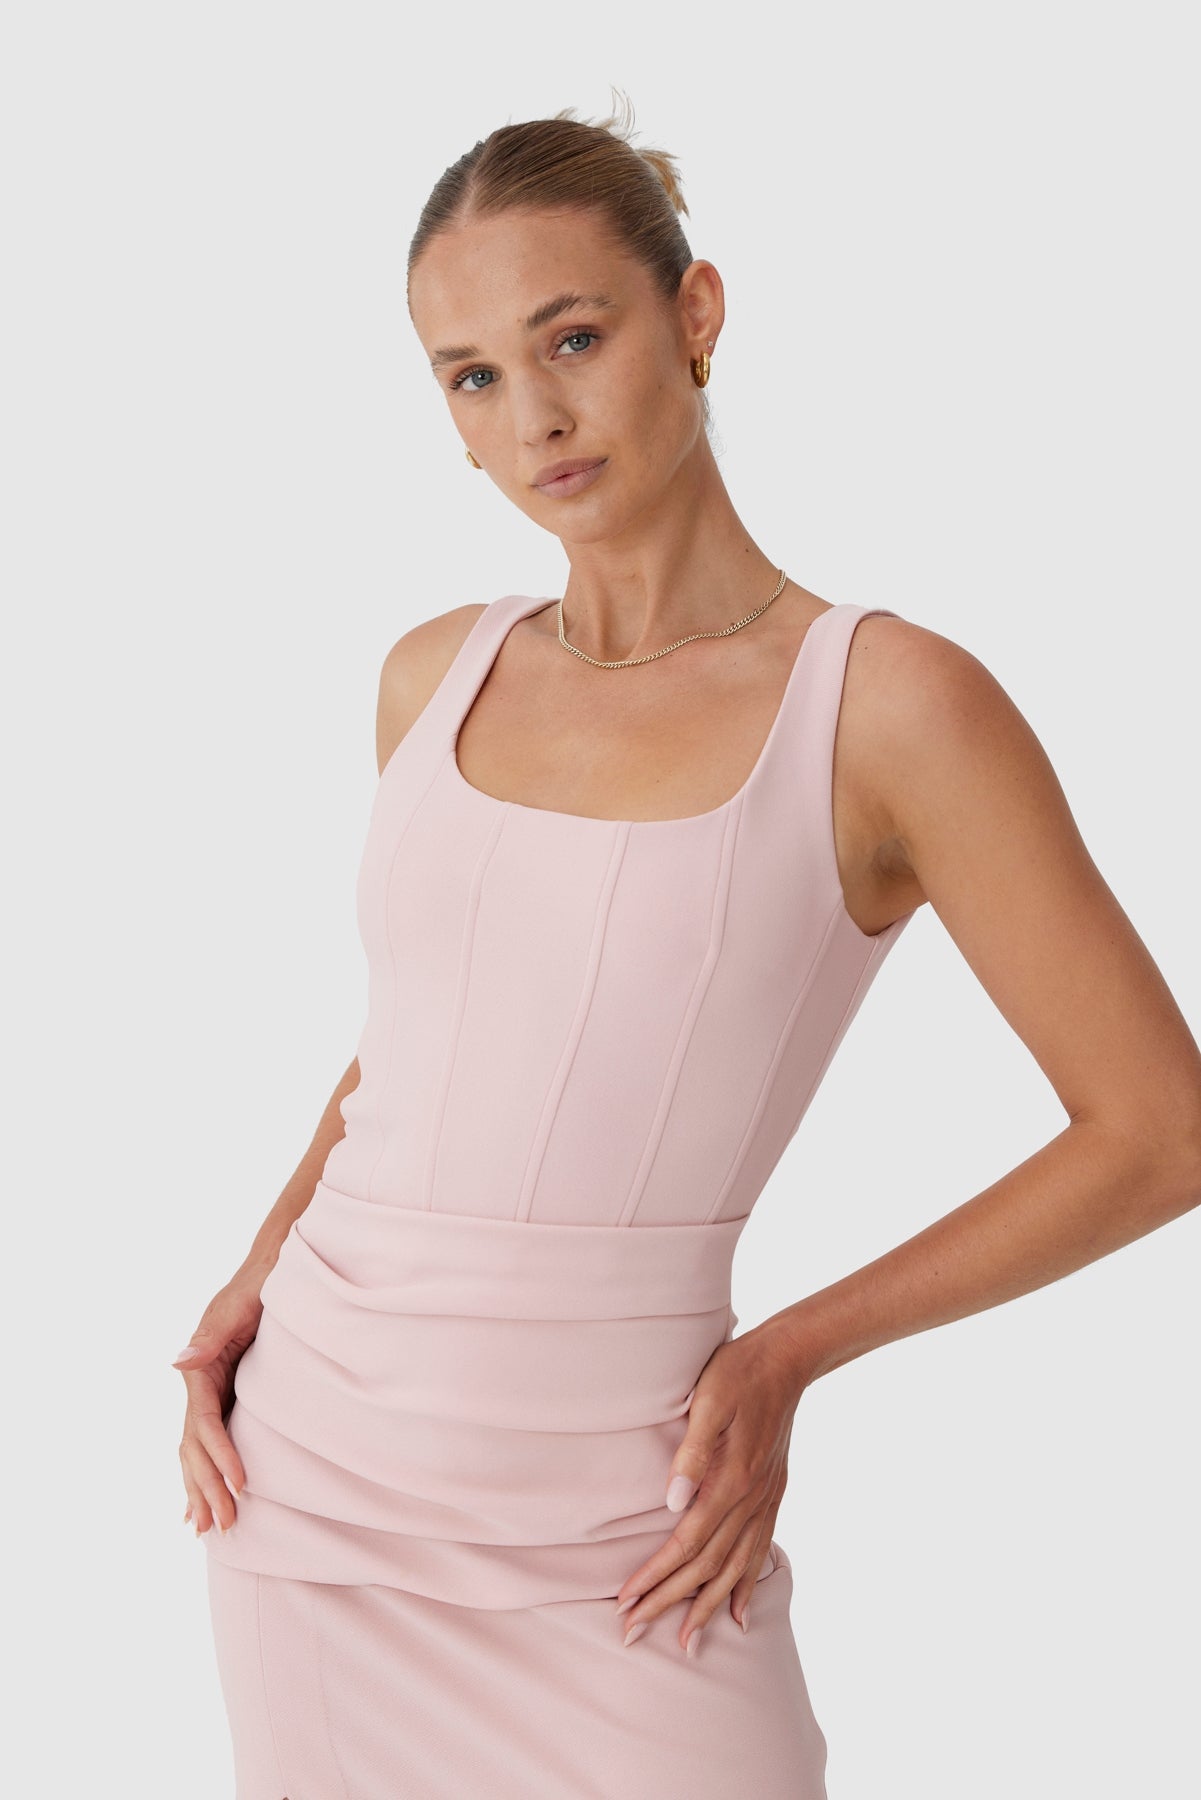 Finders - Addison Dress - Baby Pink